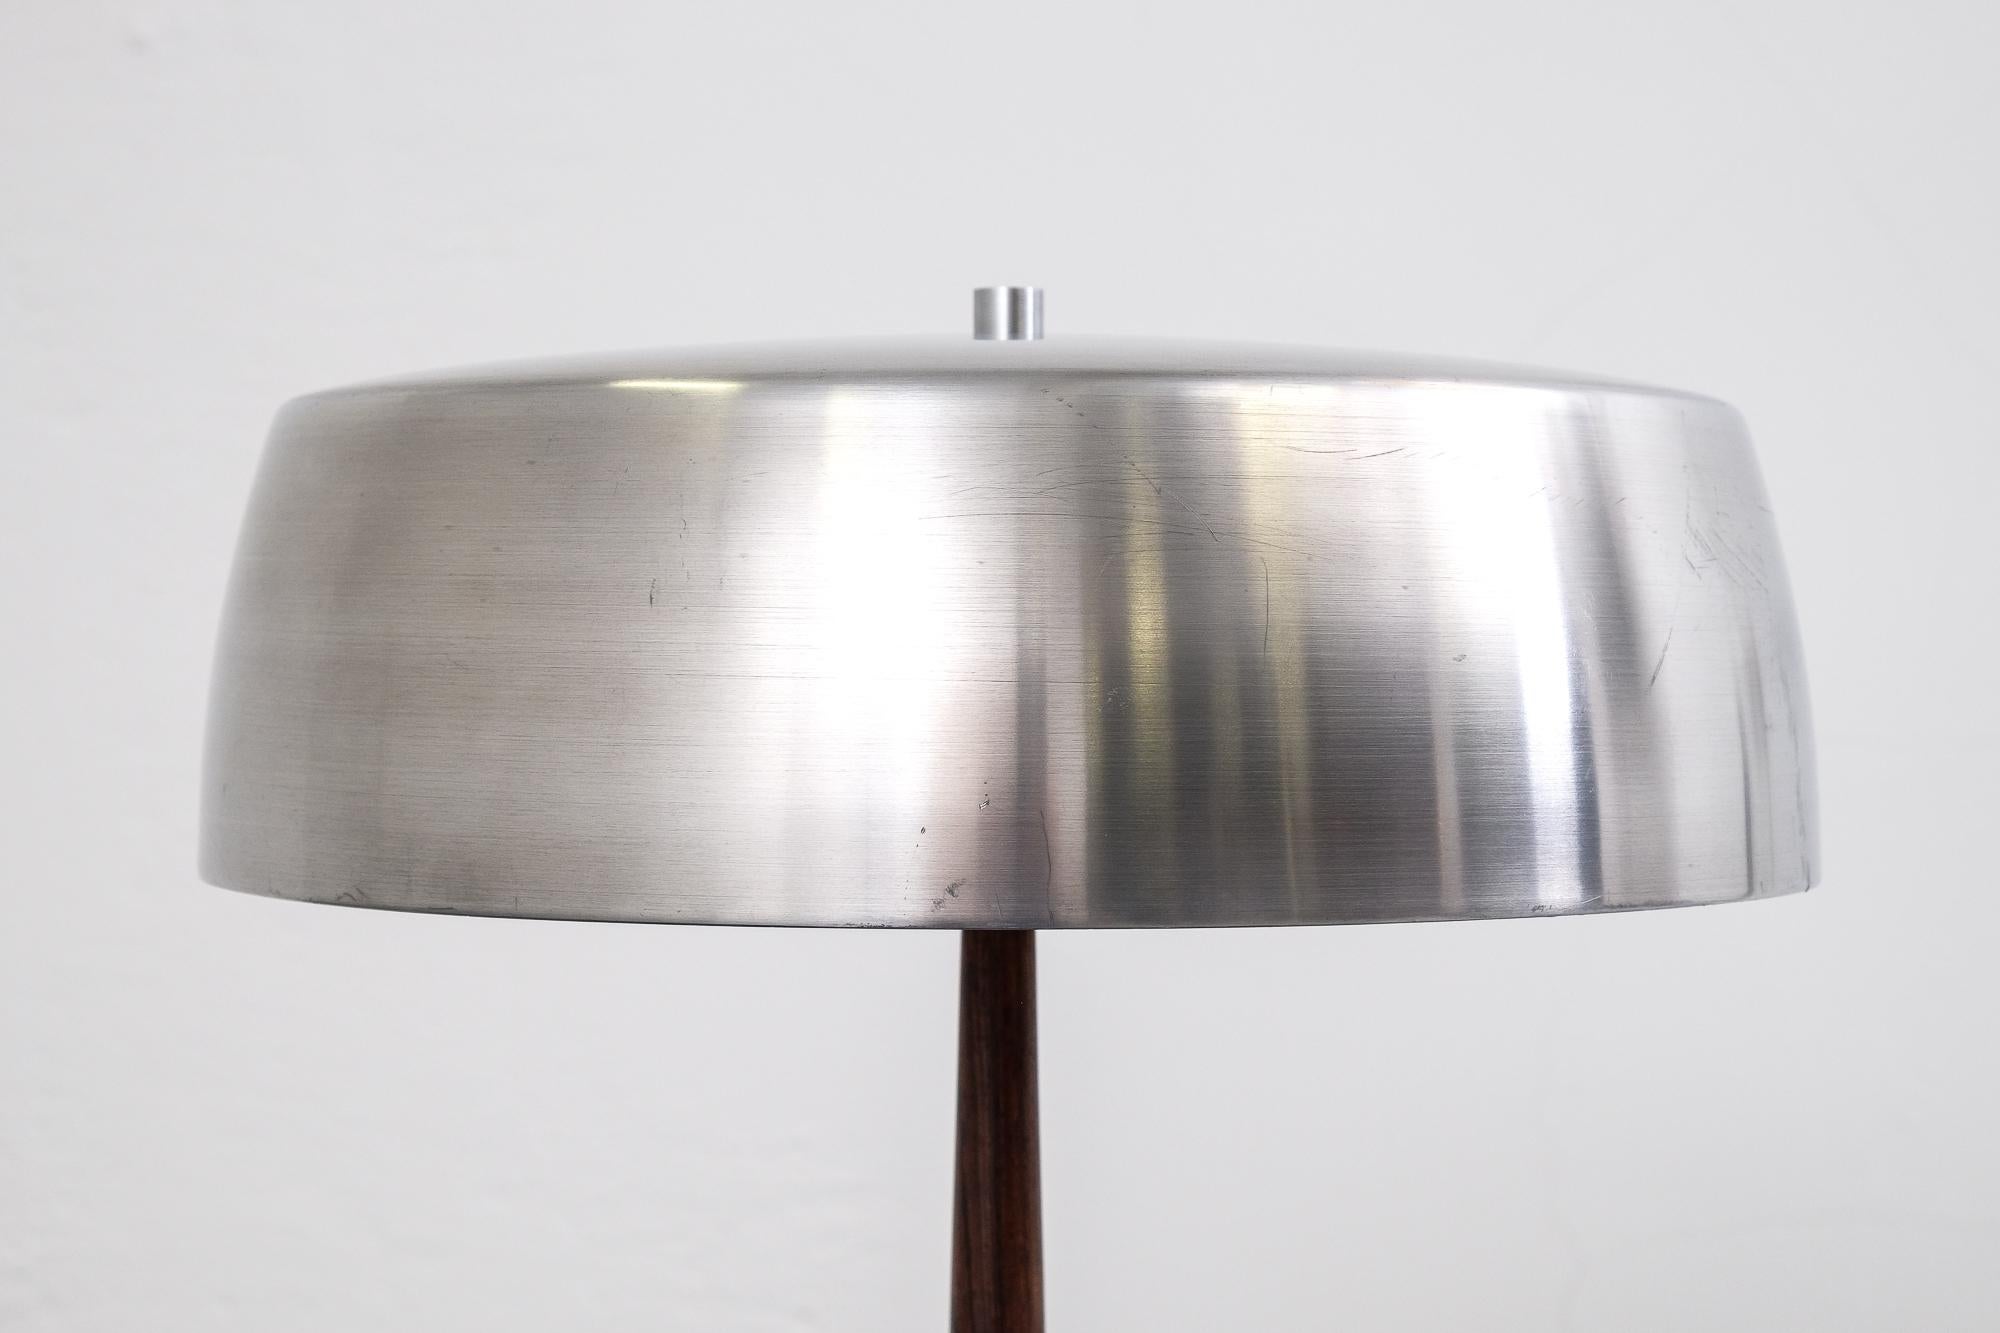 Scandinavian Modern 1960s Table Lamp in Rosewood and Aluminium by Svend Aage Holm Sørensen